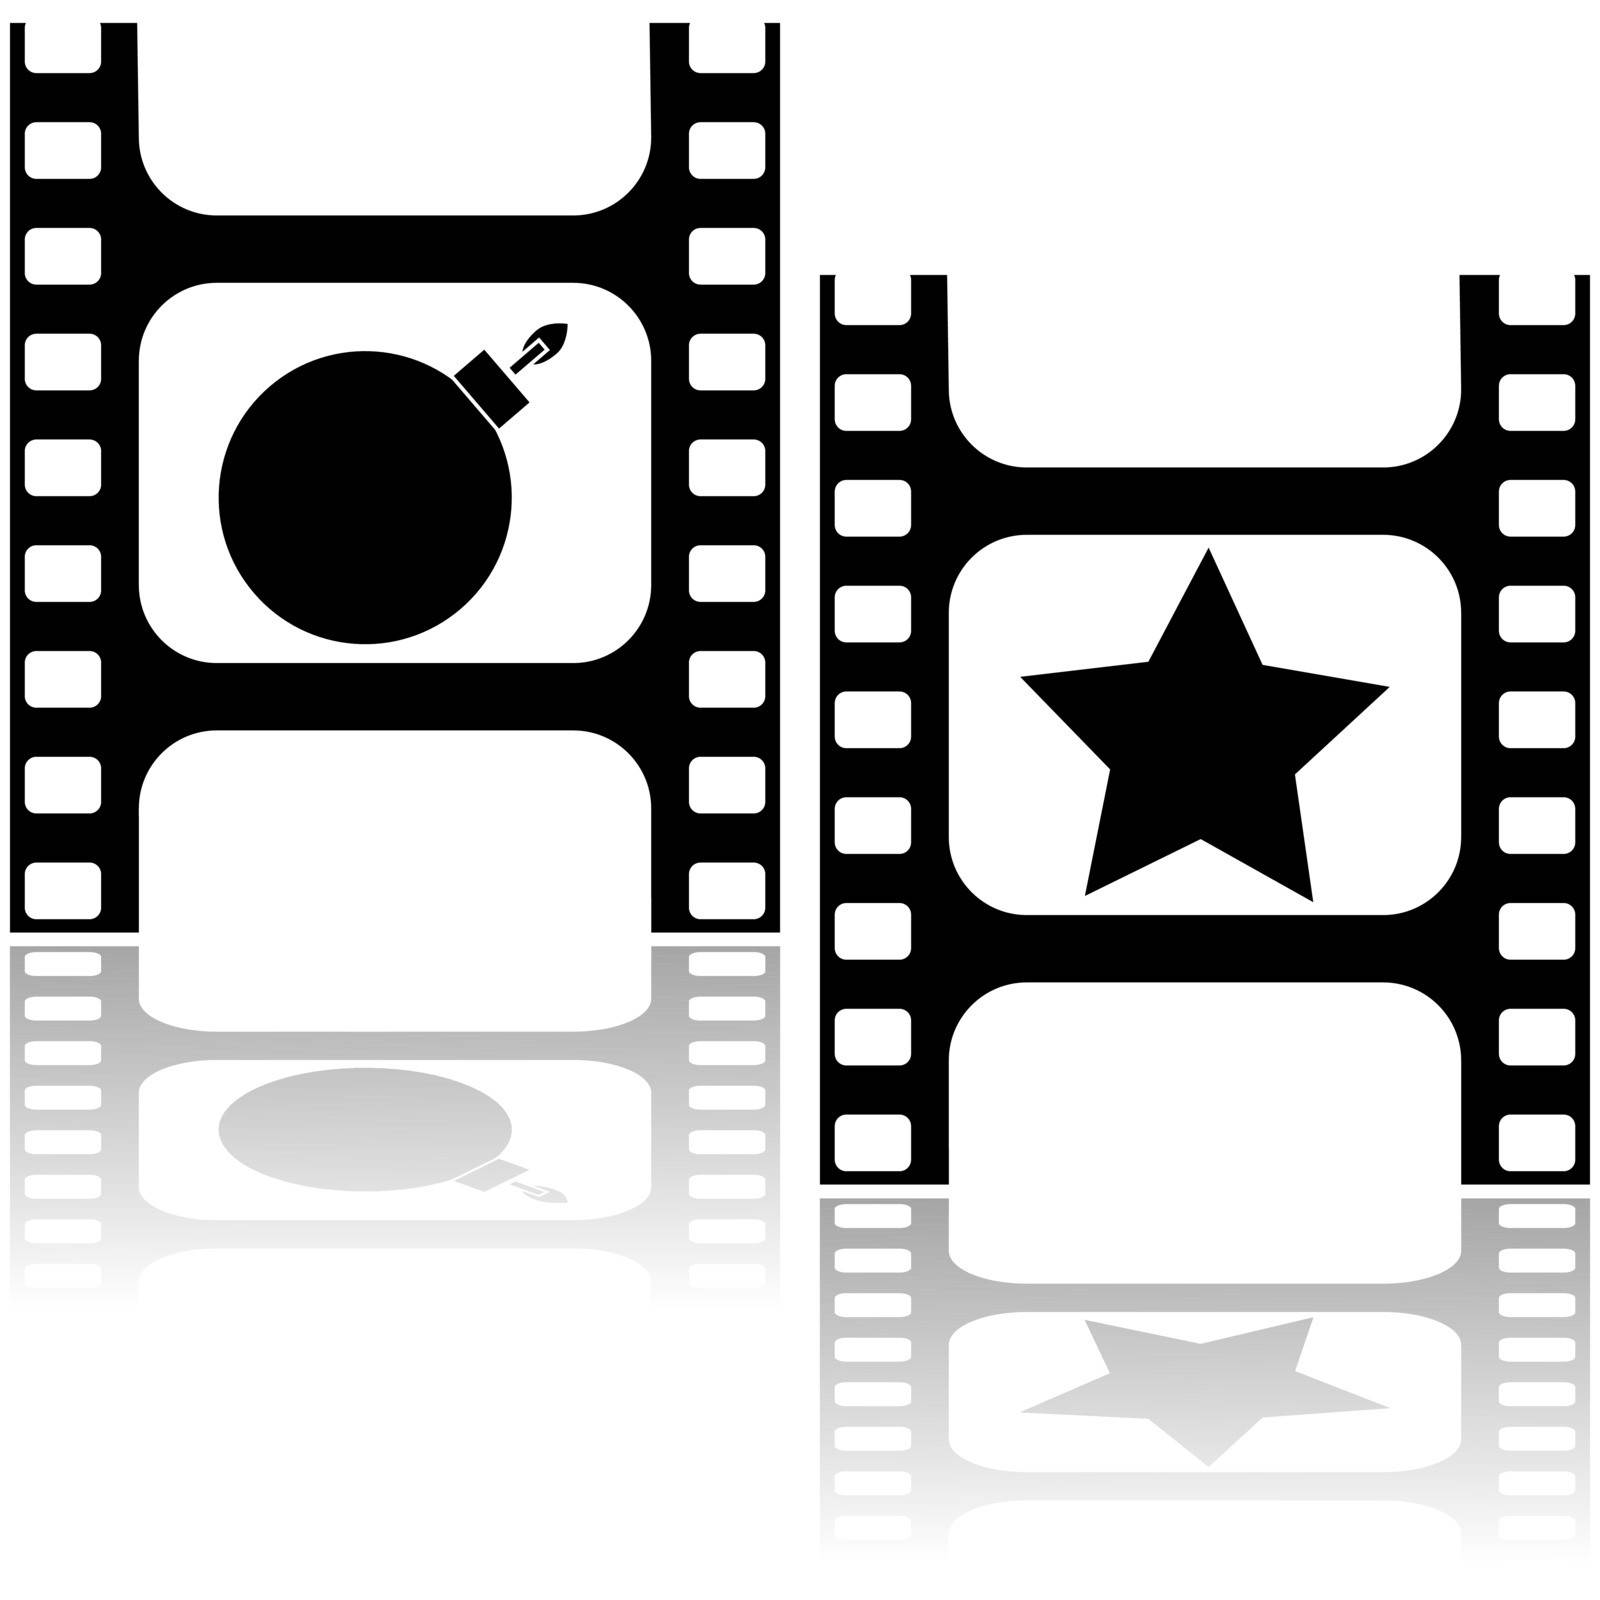 Concept illustration showing a film strip with a bomb and a star, for good and bad movies